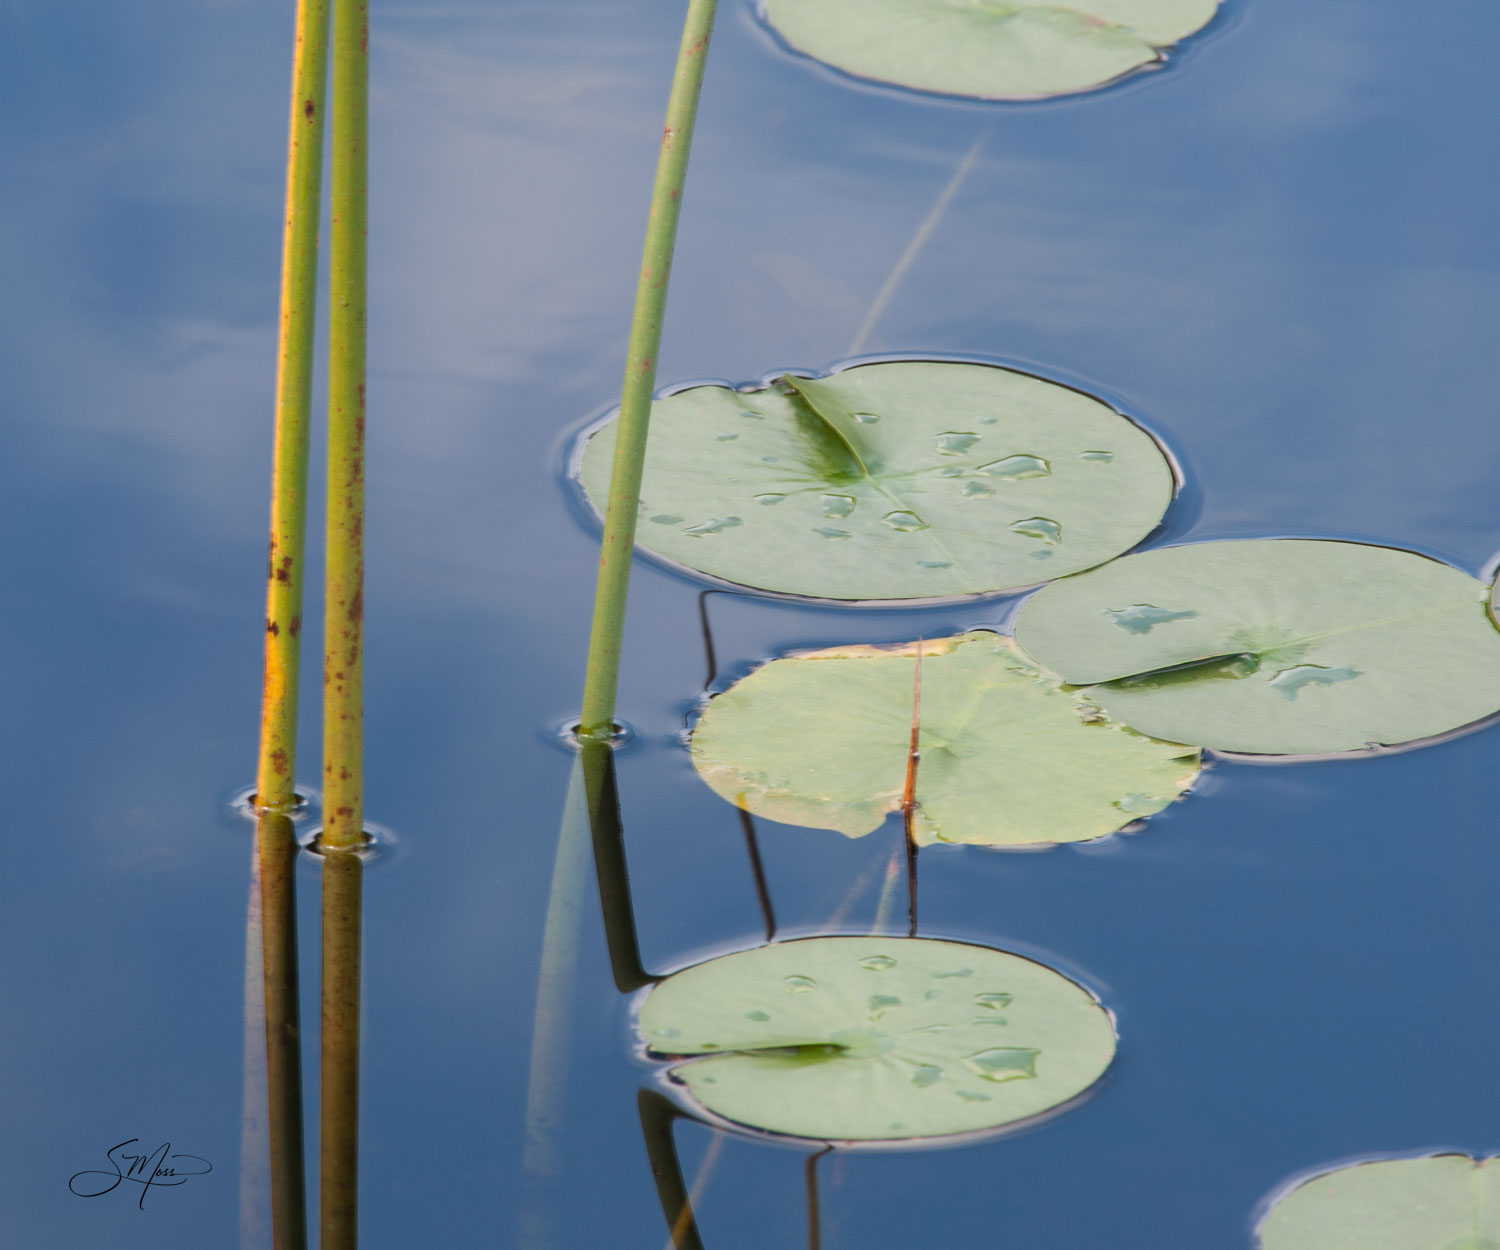 lily pads, reeds, grasses, blue water, two panels, quiet, photograph, calming, no people, close-up, green, peaceful, serene...